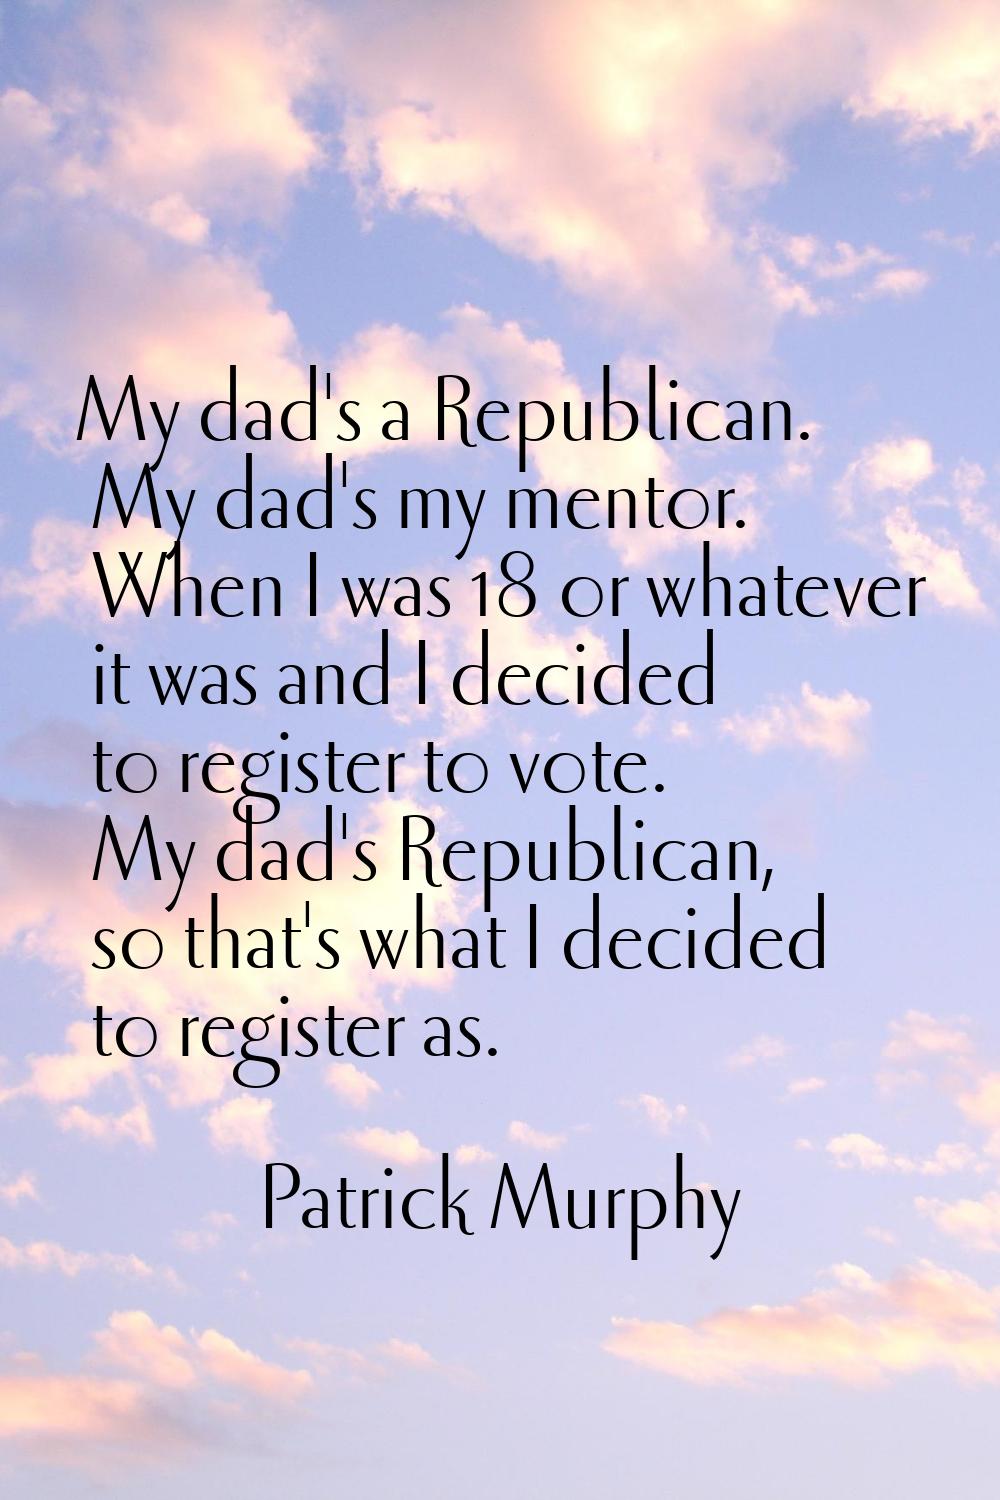 My dad's a Republican. My dad's my mentor. When I was 18 or whatever it was and I decided to regist